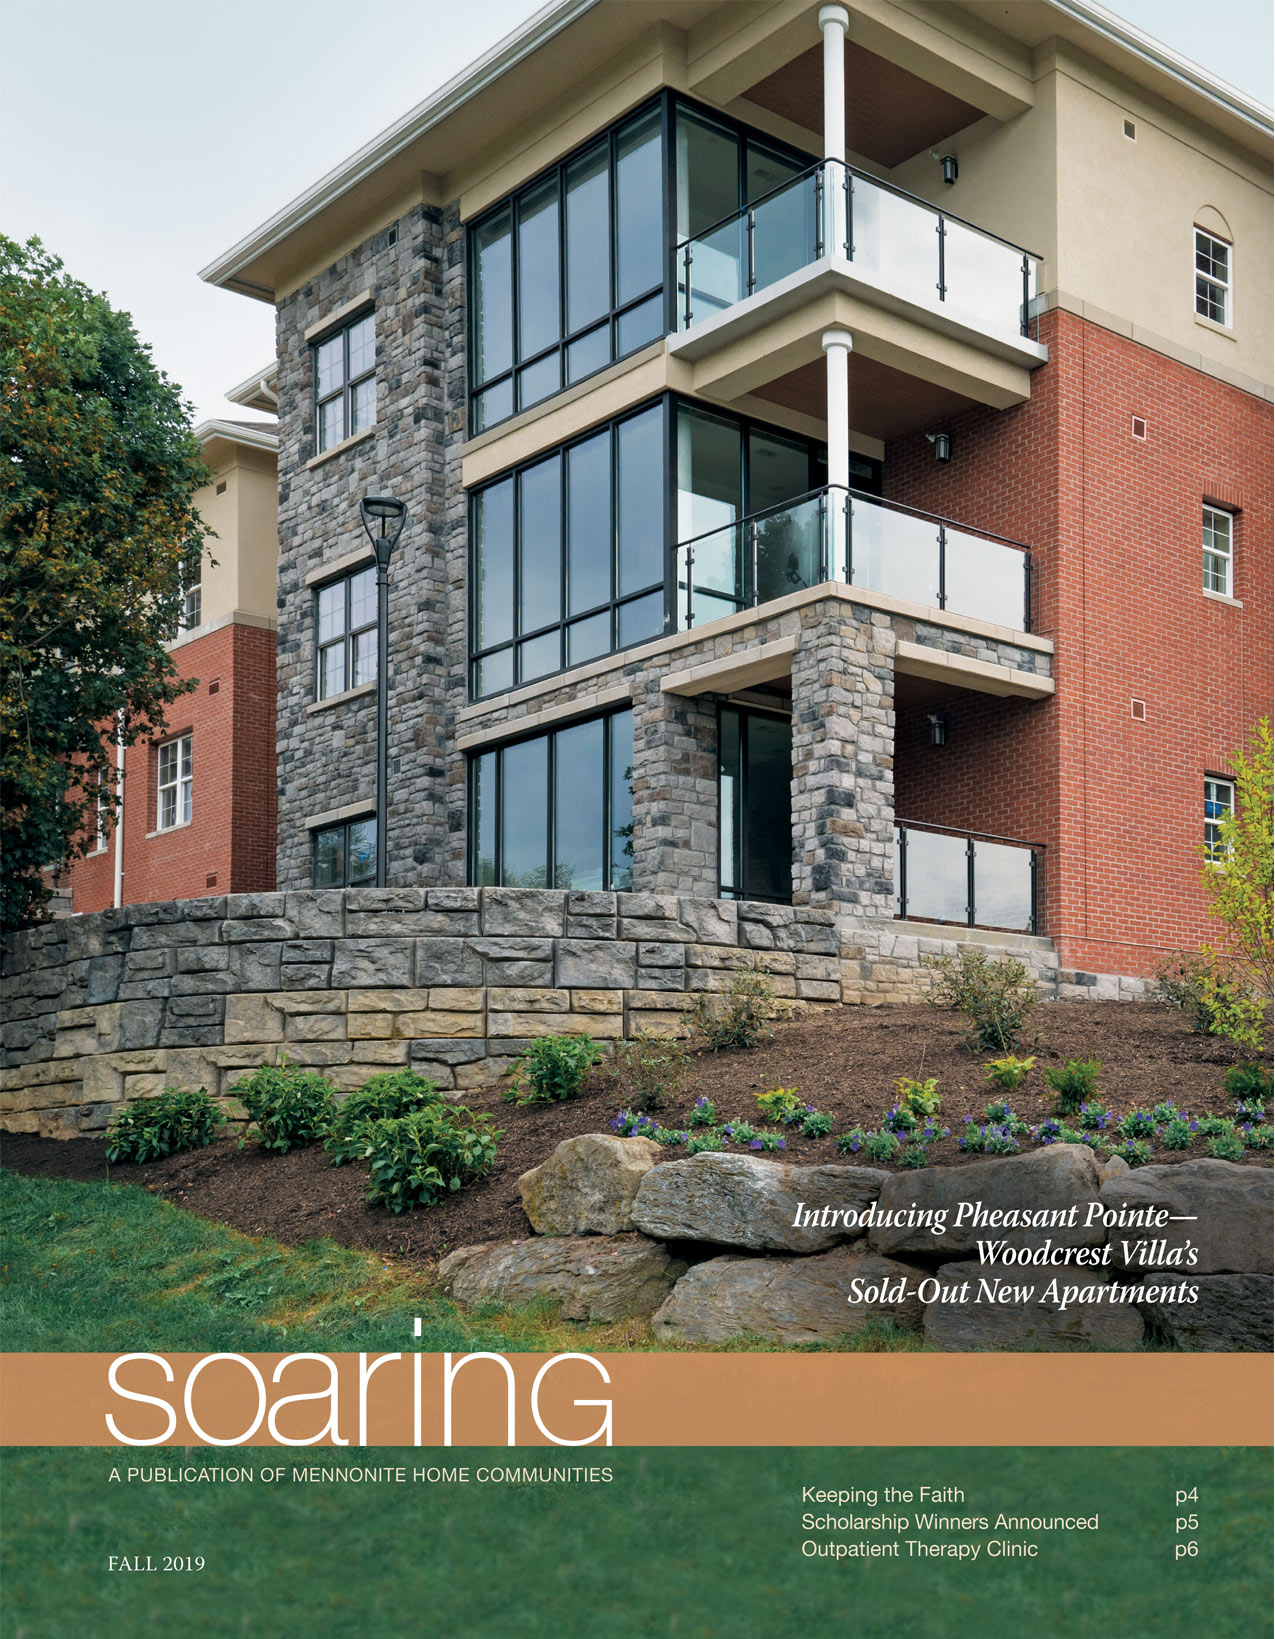 An exterior view of Pheasant Pointe on the cover of the Fall 2019 Soaring Newsletter